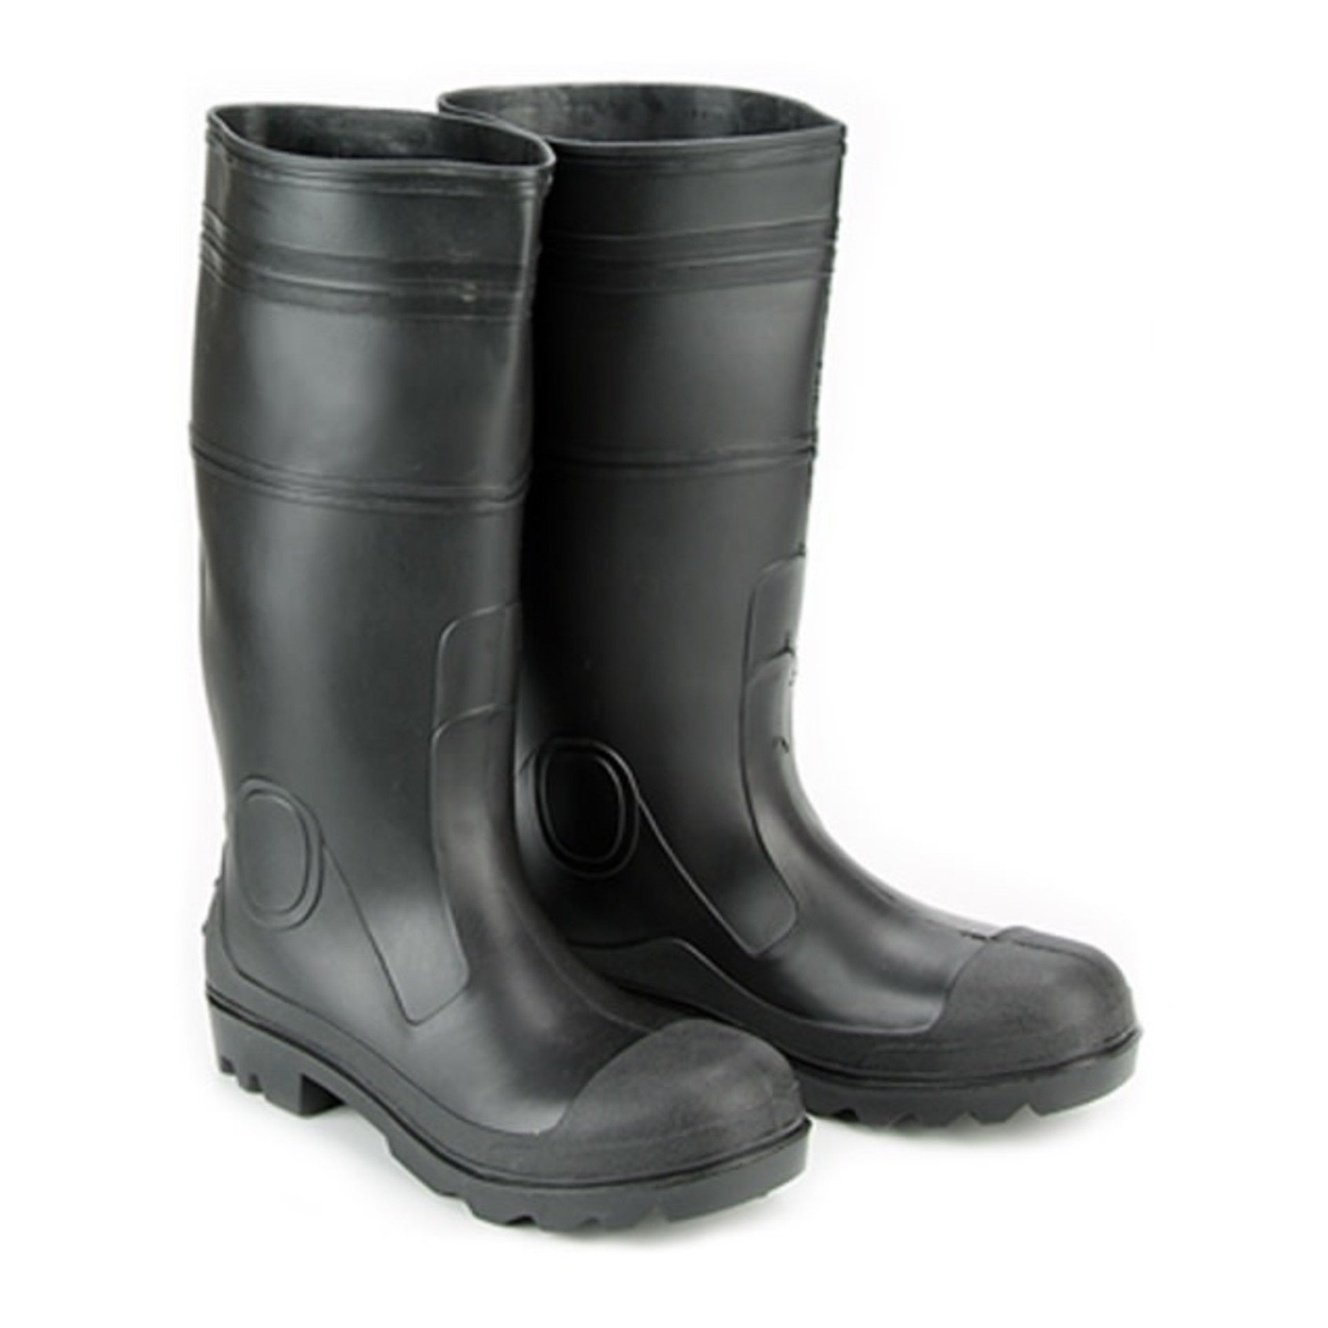 Wellington Boot | Supply Master | Accra, Ghana Boots & Footwear Buy Tools hardware Building materials